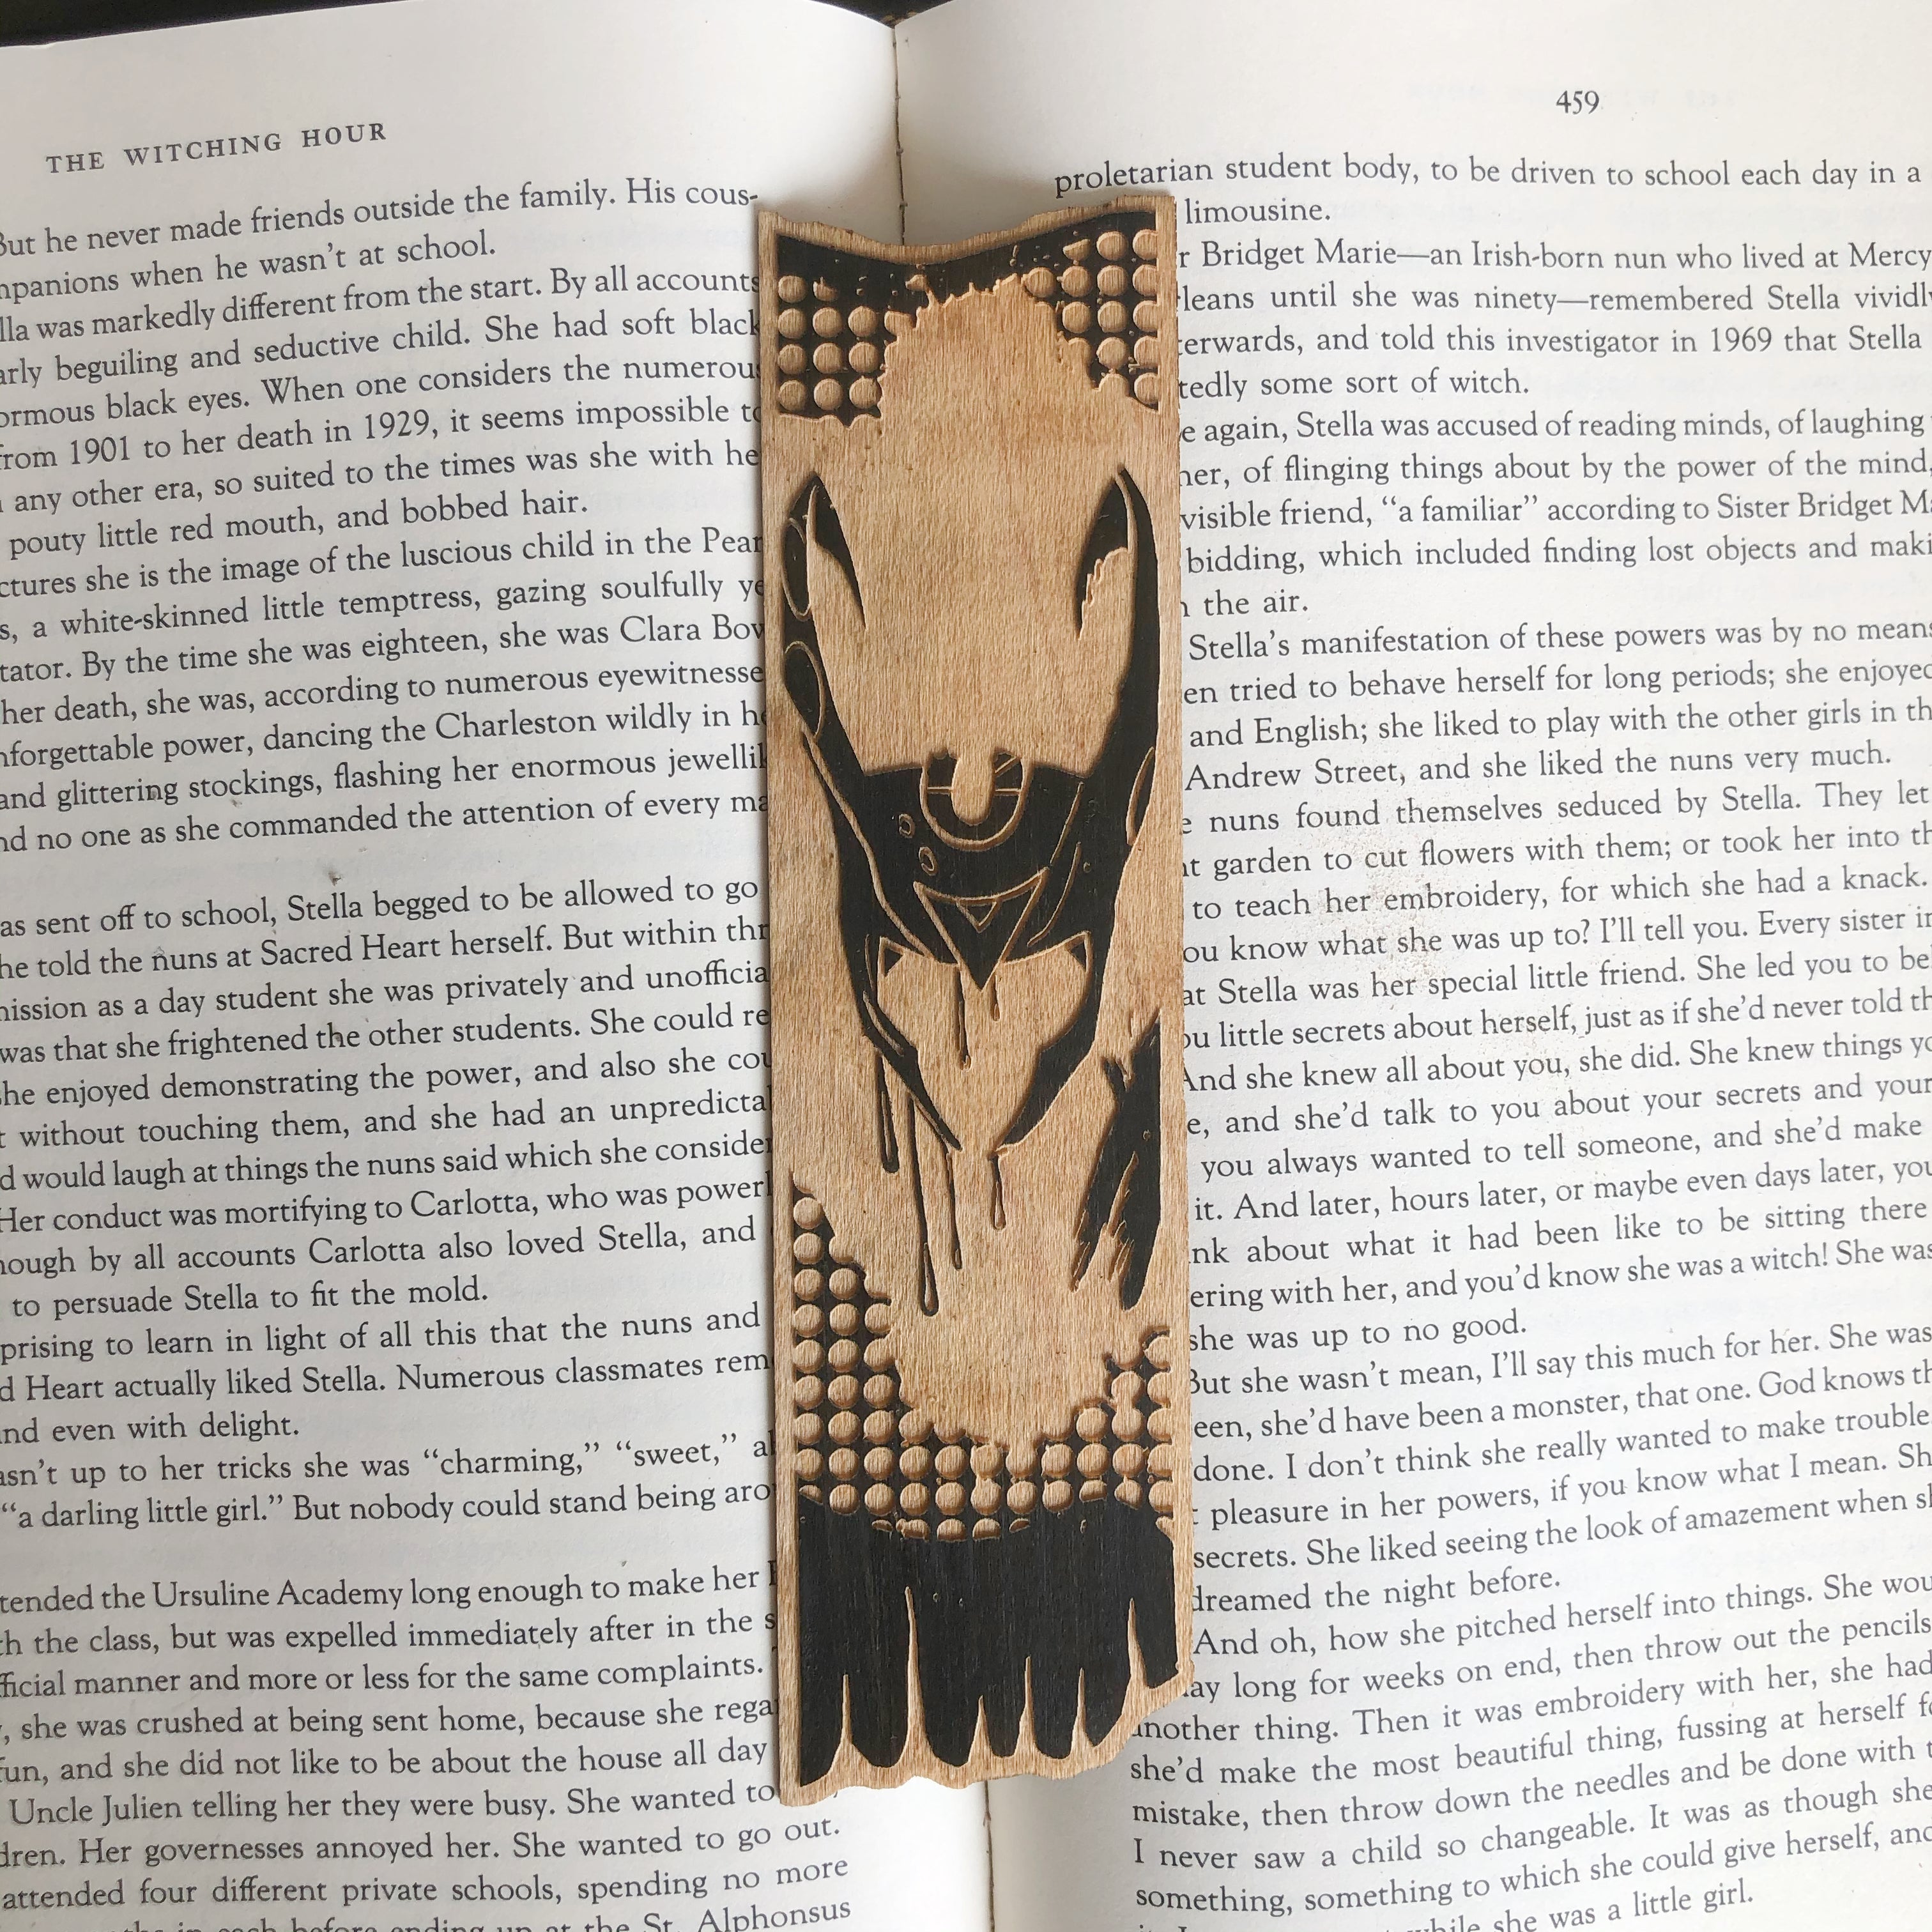 God of Chaos Wooden Bookmark